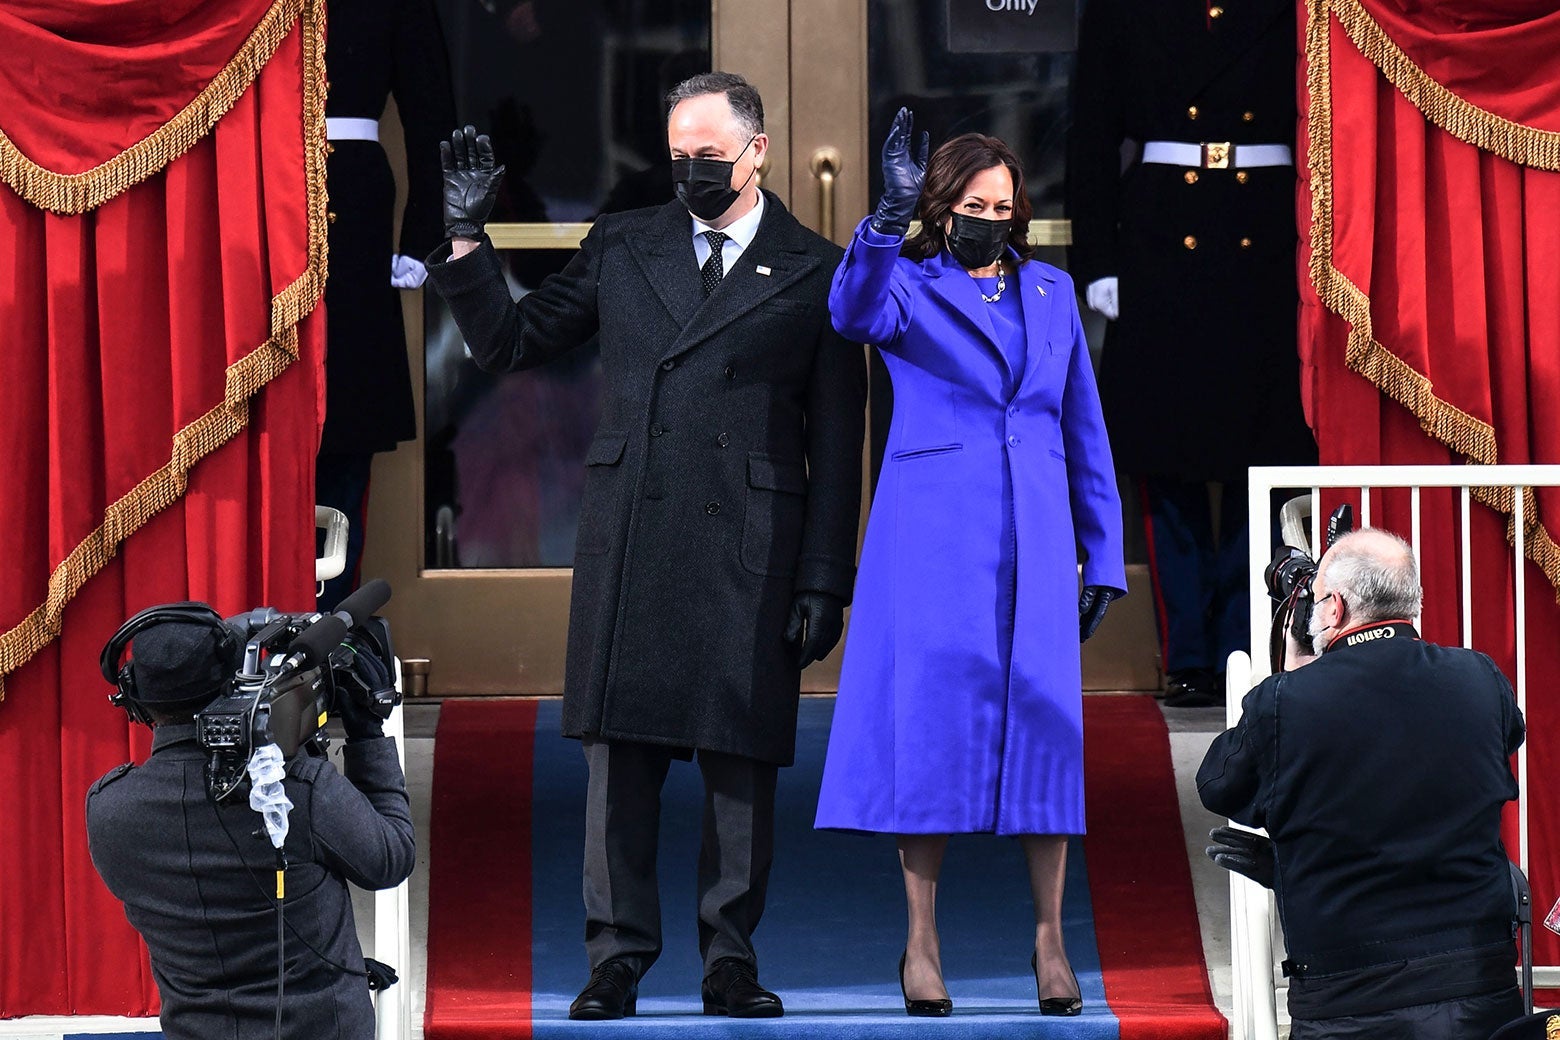 Doug Emhoff and Kamala Harris wave in front of the Capitol doors. Emhoff wears a dark suit, overcoat, and mask. Harris wears a purple coat with a purple dress underneath and a black mask.